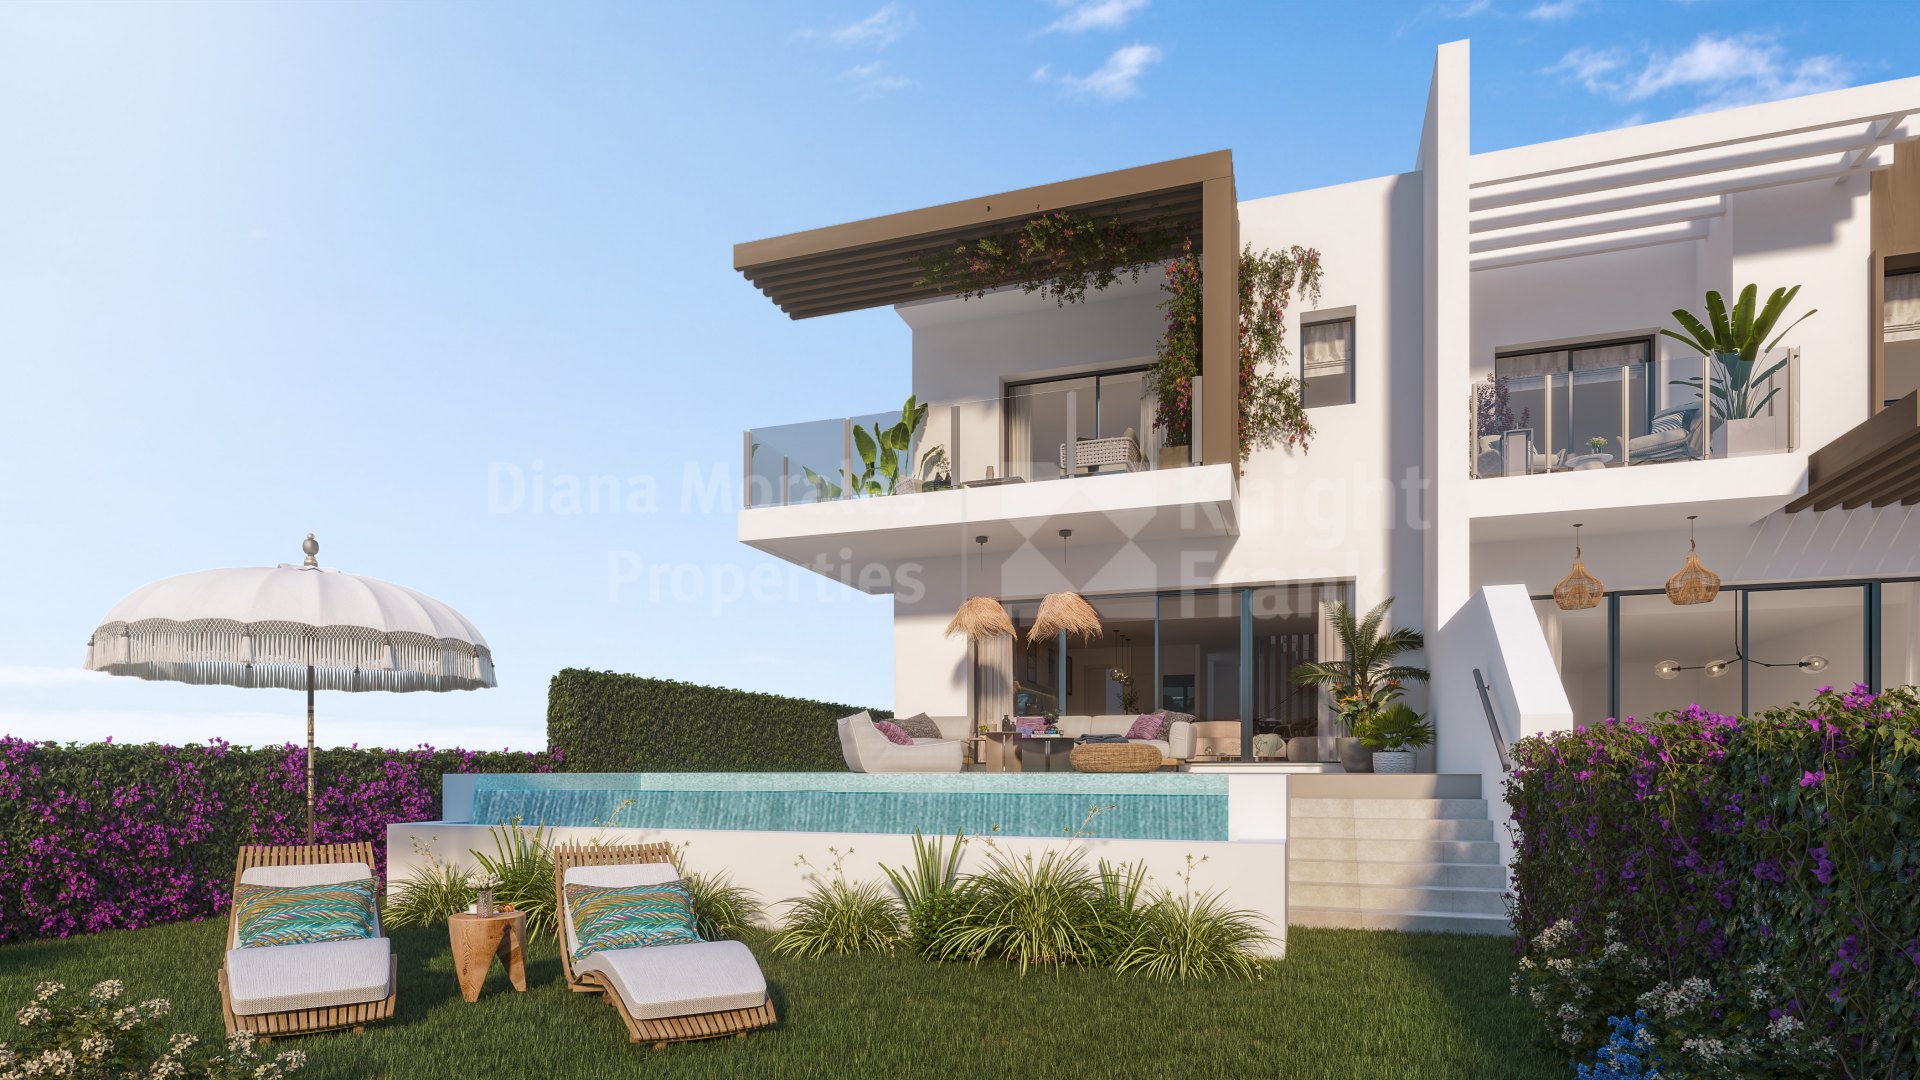 El Chaparral, New 3-bedroom townhouse next to the golf course with sea views